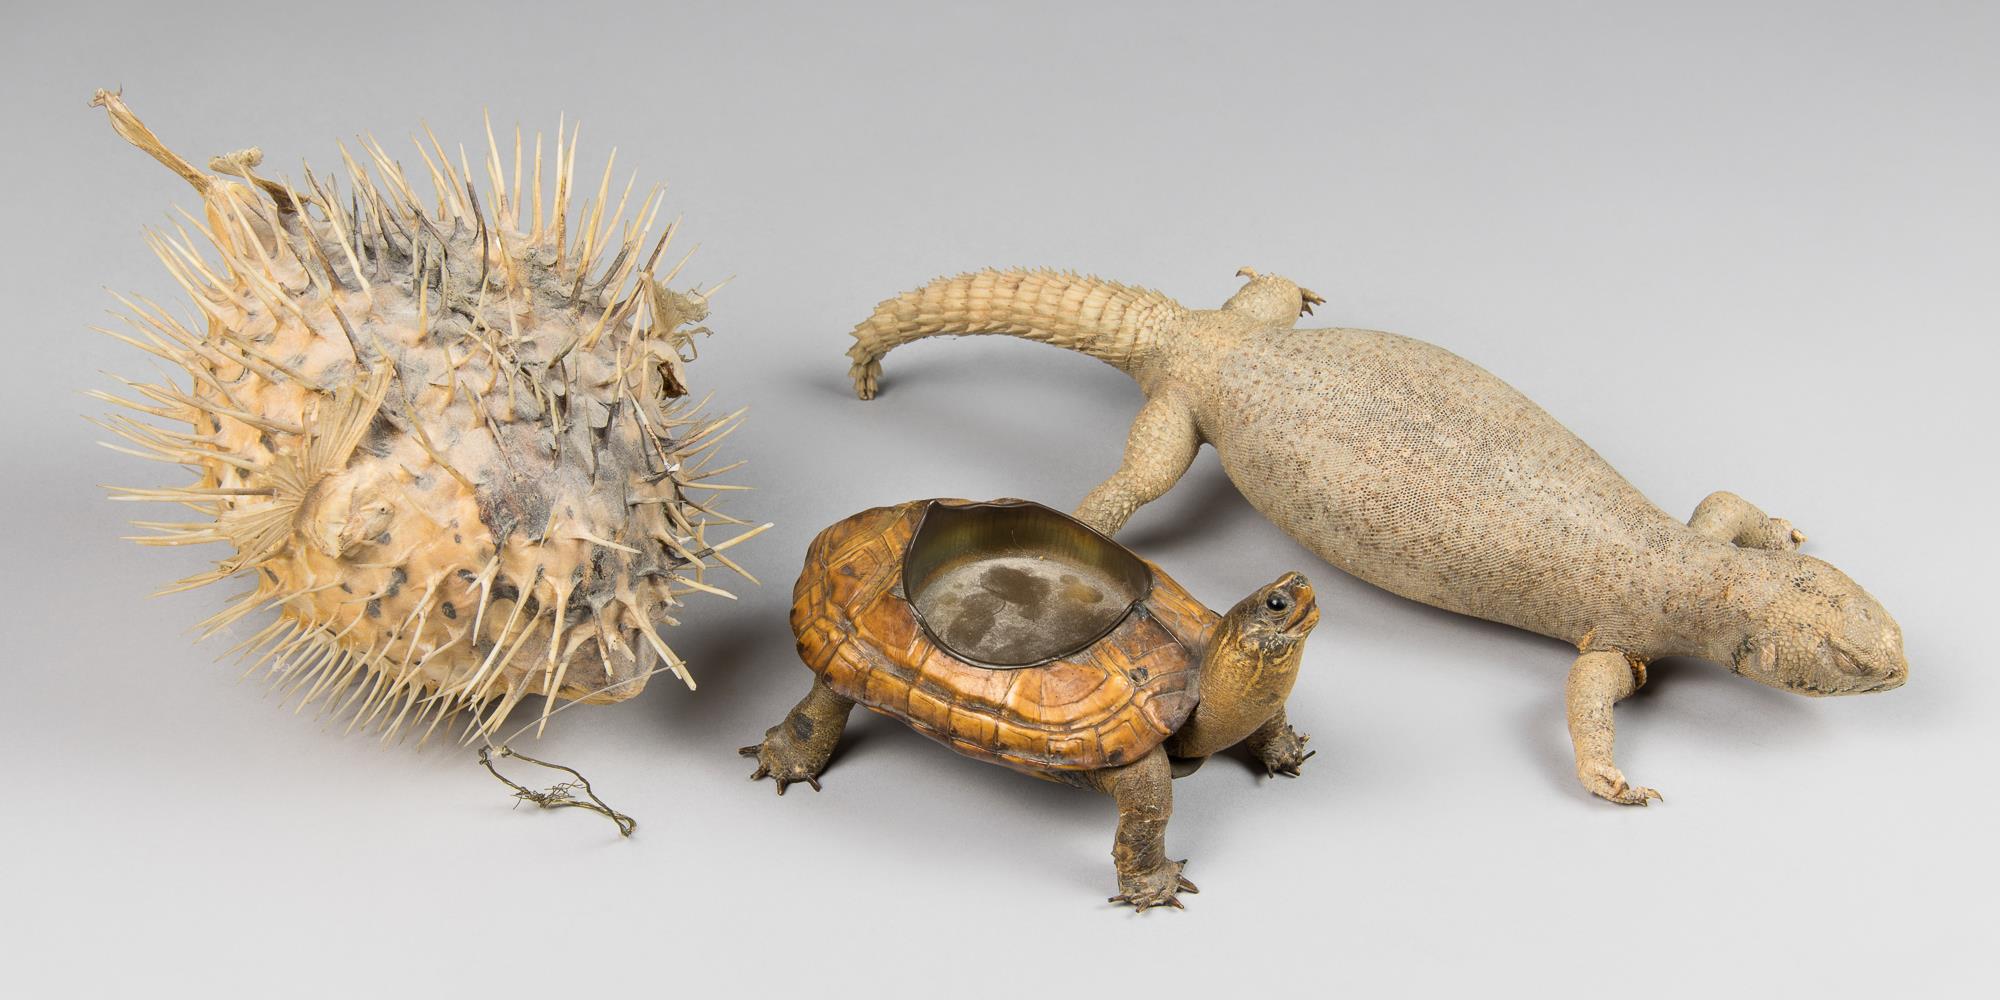 A GROUP OF EARLY 20TH CENTURY TAXIDERMY SPECIMENS INCLUDING A SPINY-TAIL LIZARD, A TORTOISE